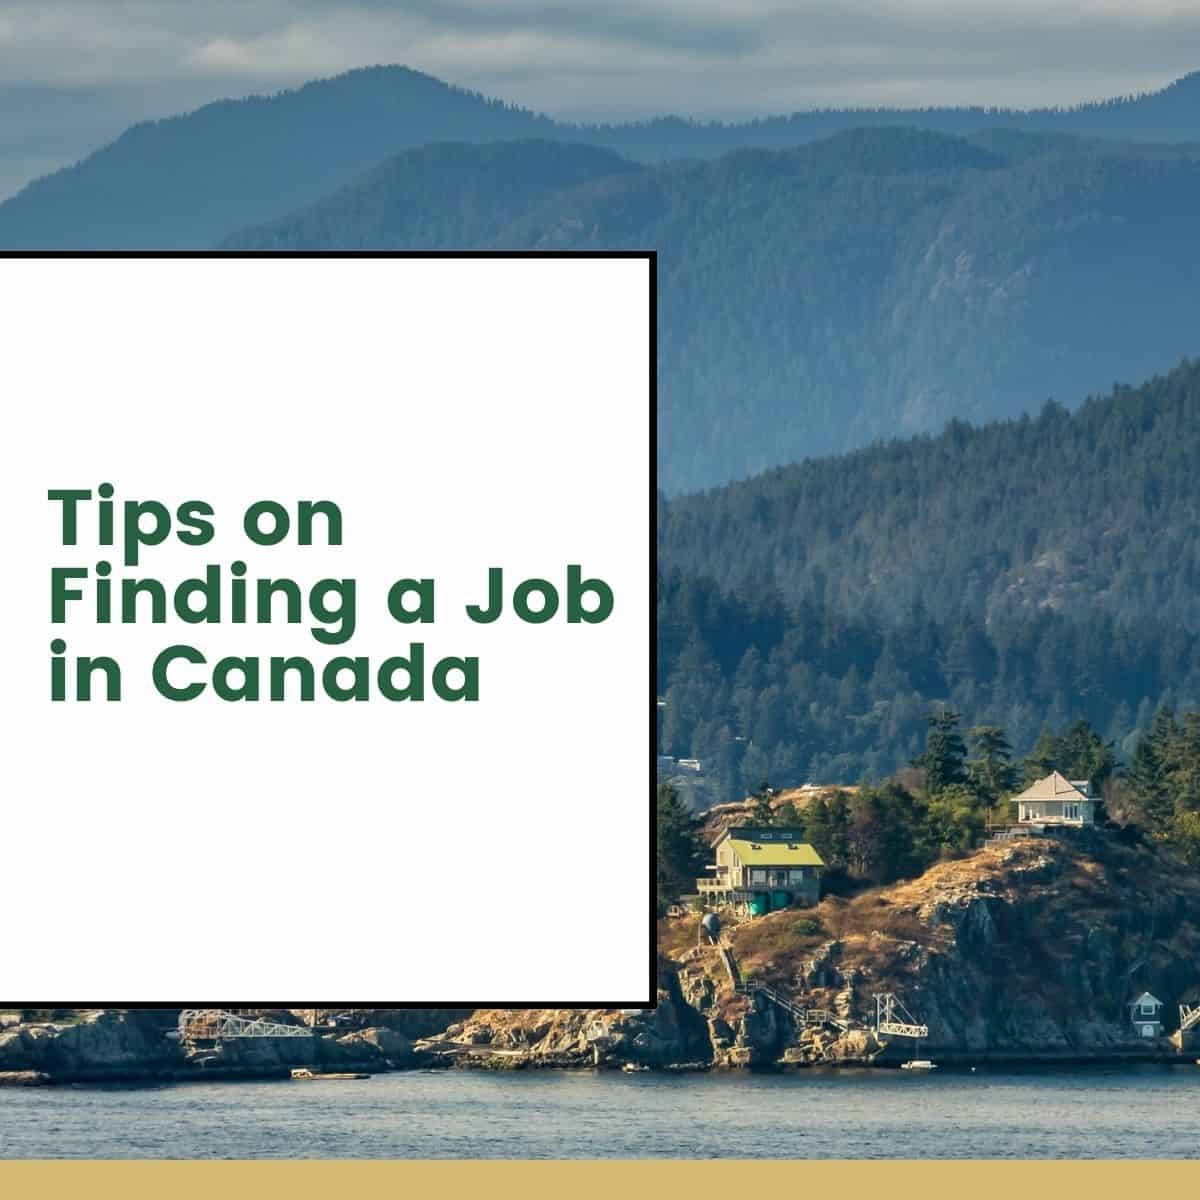 Tips on Finding a Job in Canada